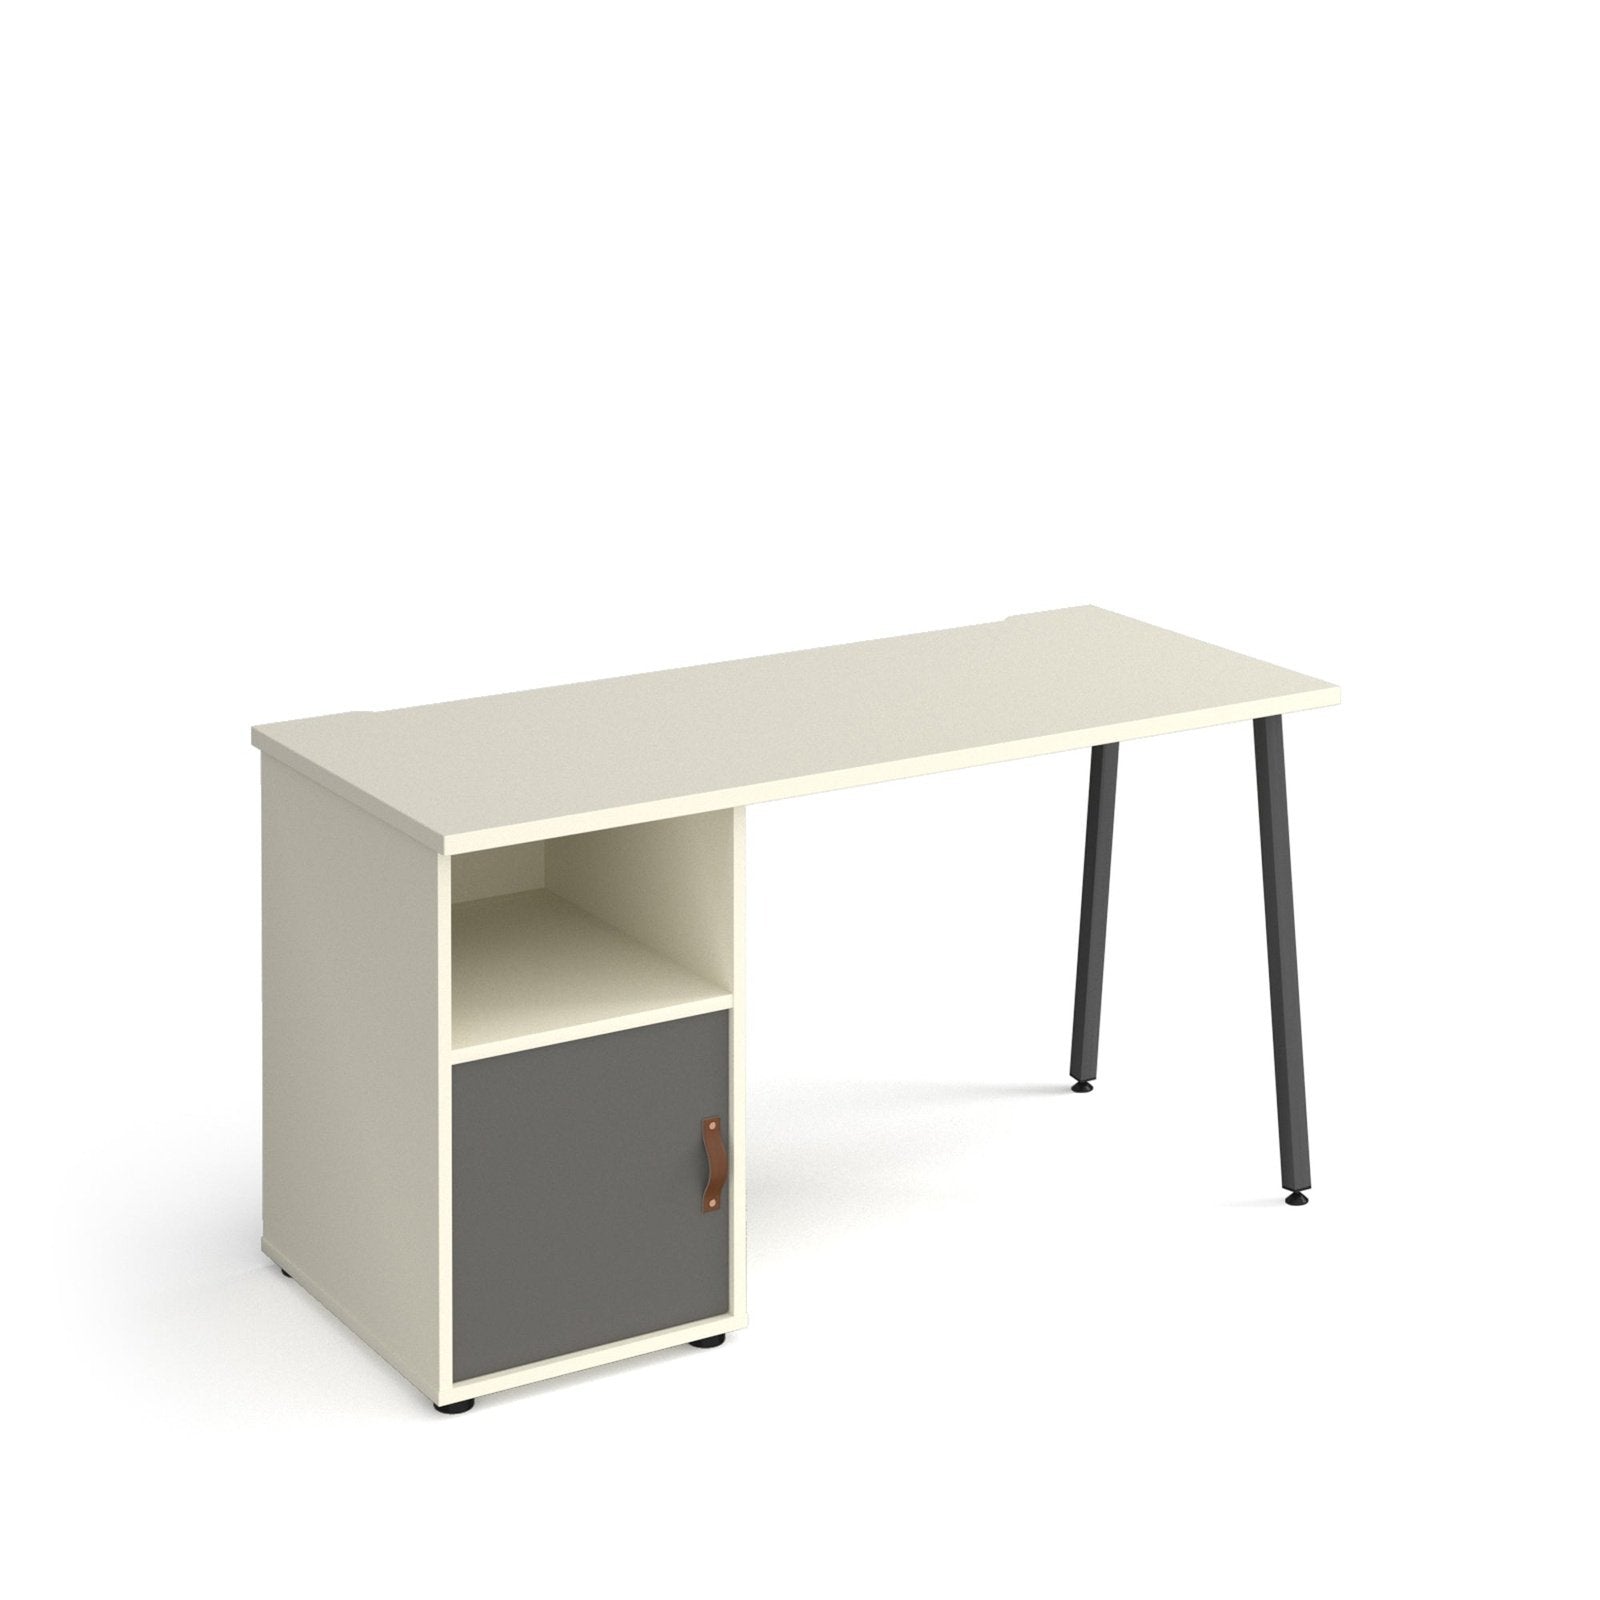 Sparta straight desk with A-frame leg and support pedestal - Office Products Online